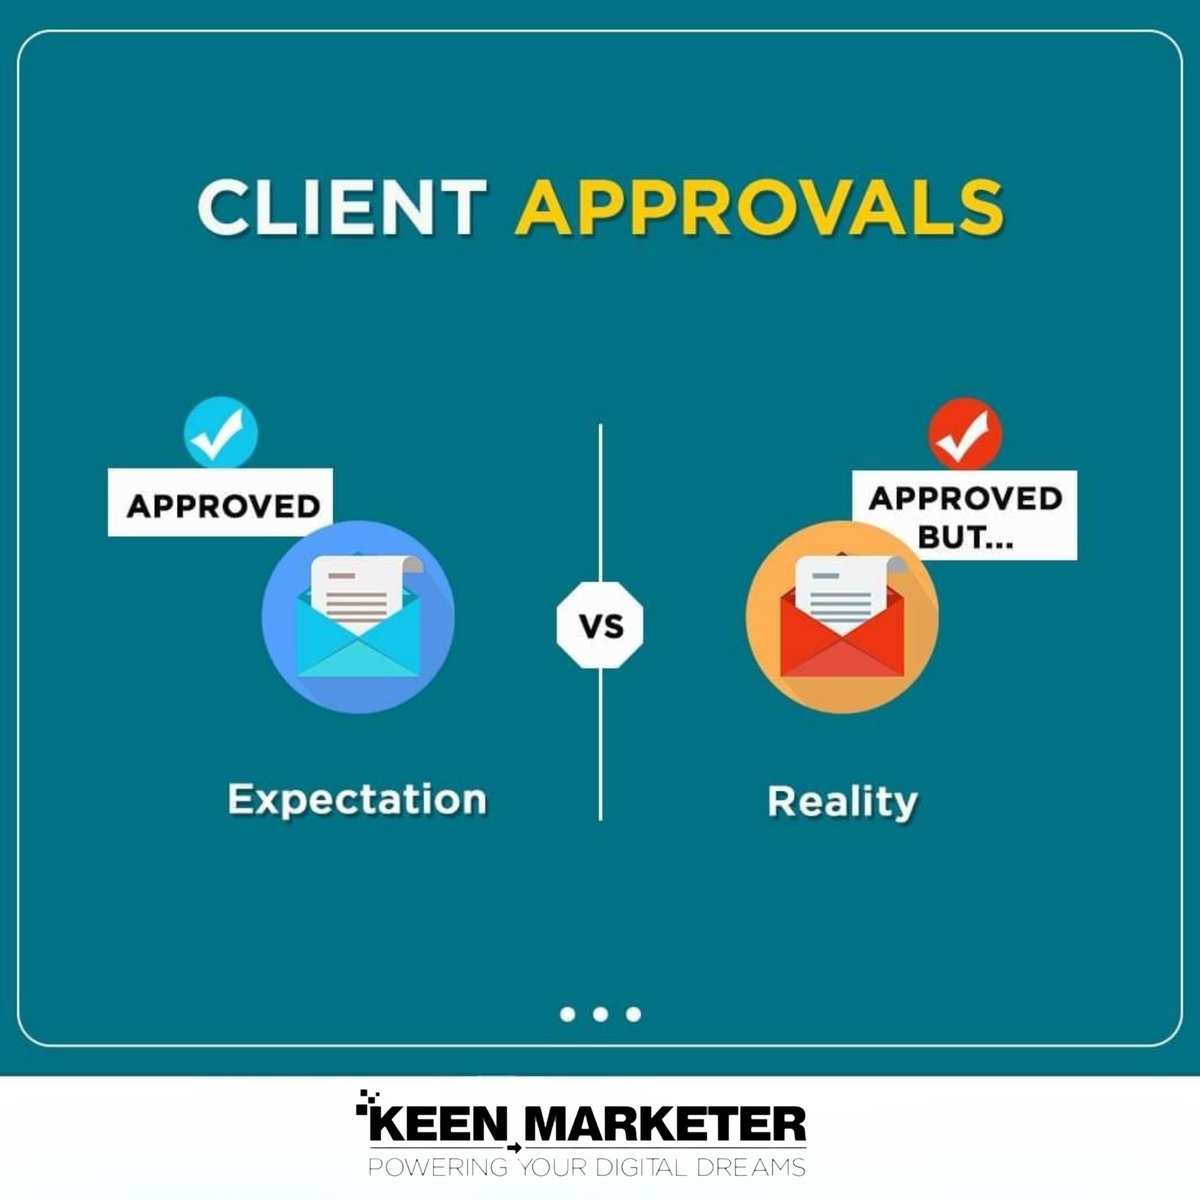 Client approvals: Reality vs Expectation. Because sometimes the journey is as interesting as the destination. 😄💼 𝗖𝗼𝗻𝘁𝗮𝗰𝘁 𝘂𝘀 𝗳𝗼𝗿 𝘆𝗼𝘂𝗿 𝗽𝗿𝗼𝗷𝗲𝗰𝘁 𝗾𝘂𝗲𝗿𝘆. 🔗Visit Our Website: keenmarketer.in 📞 Call Now: +91-931-934-7701 #keenmarketer